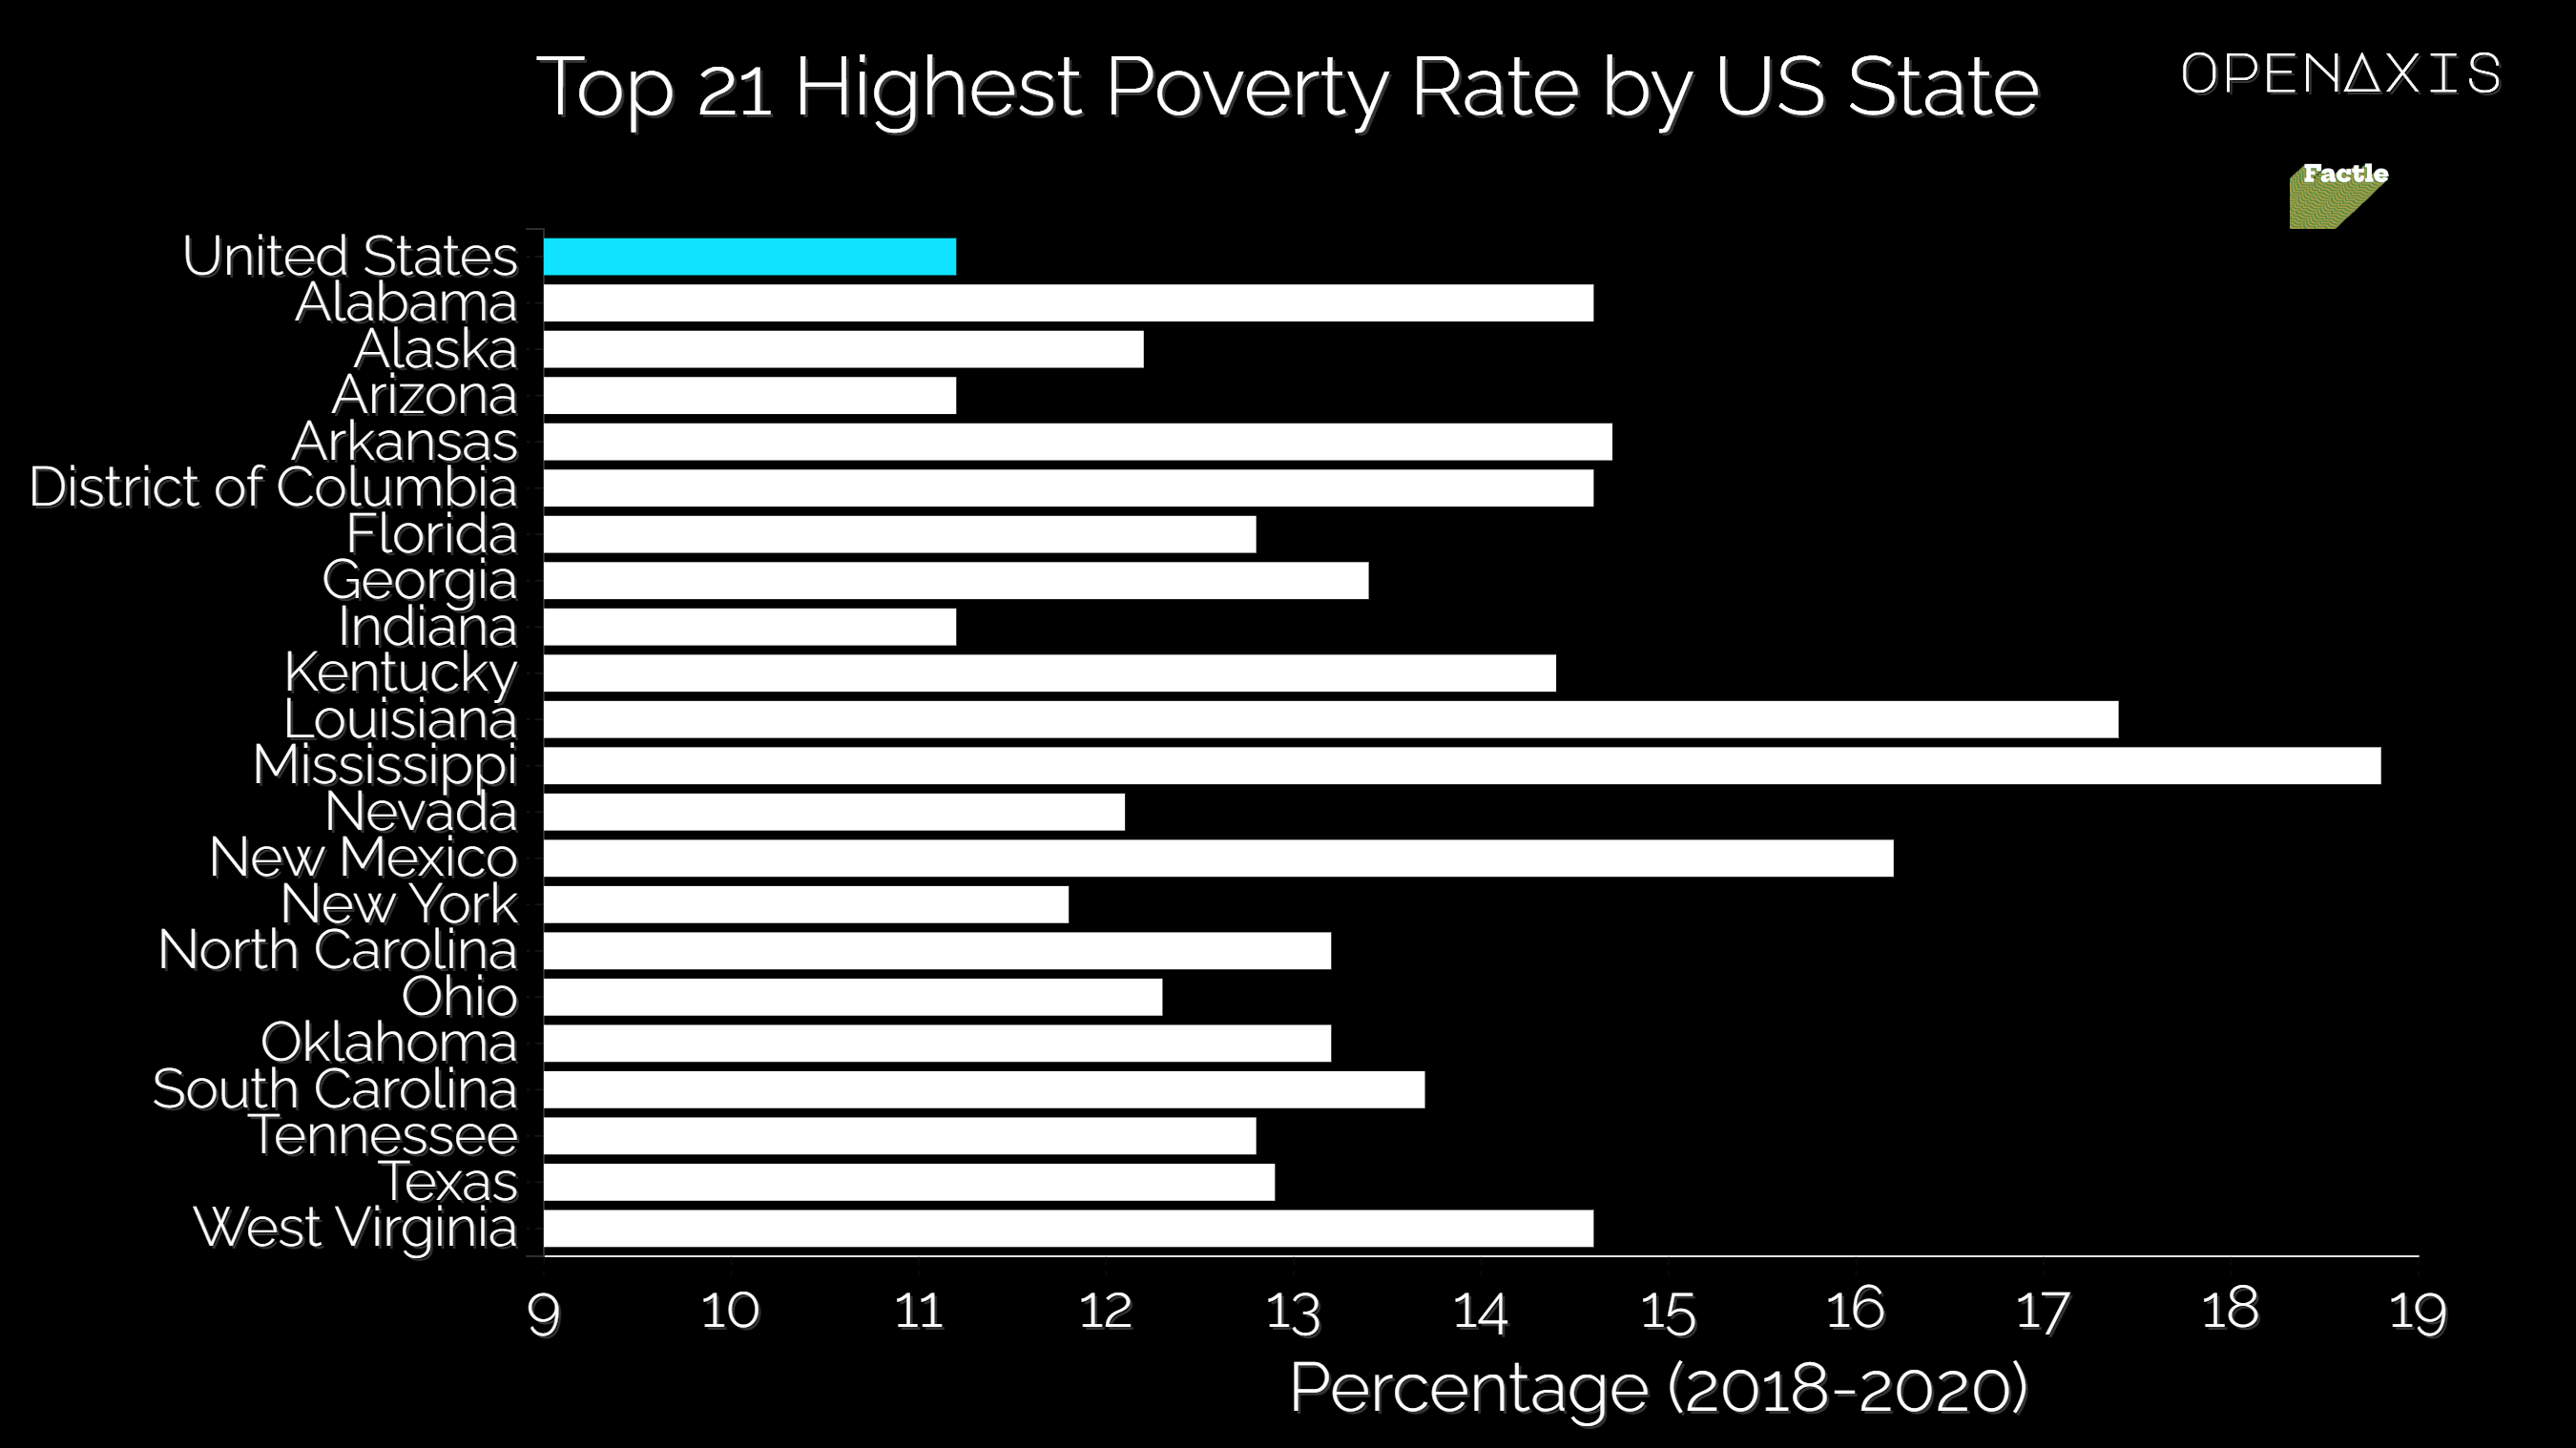 "Top 21 Highest Poverty Rate by US State"